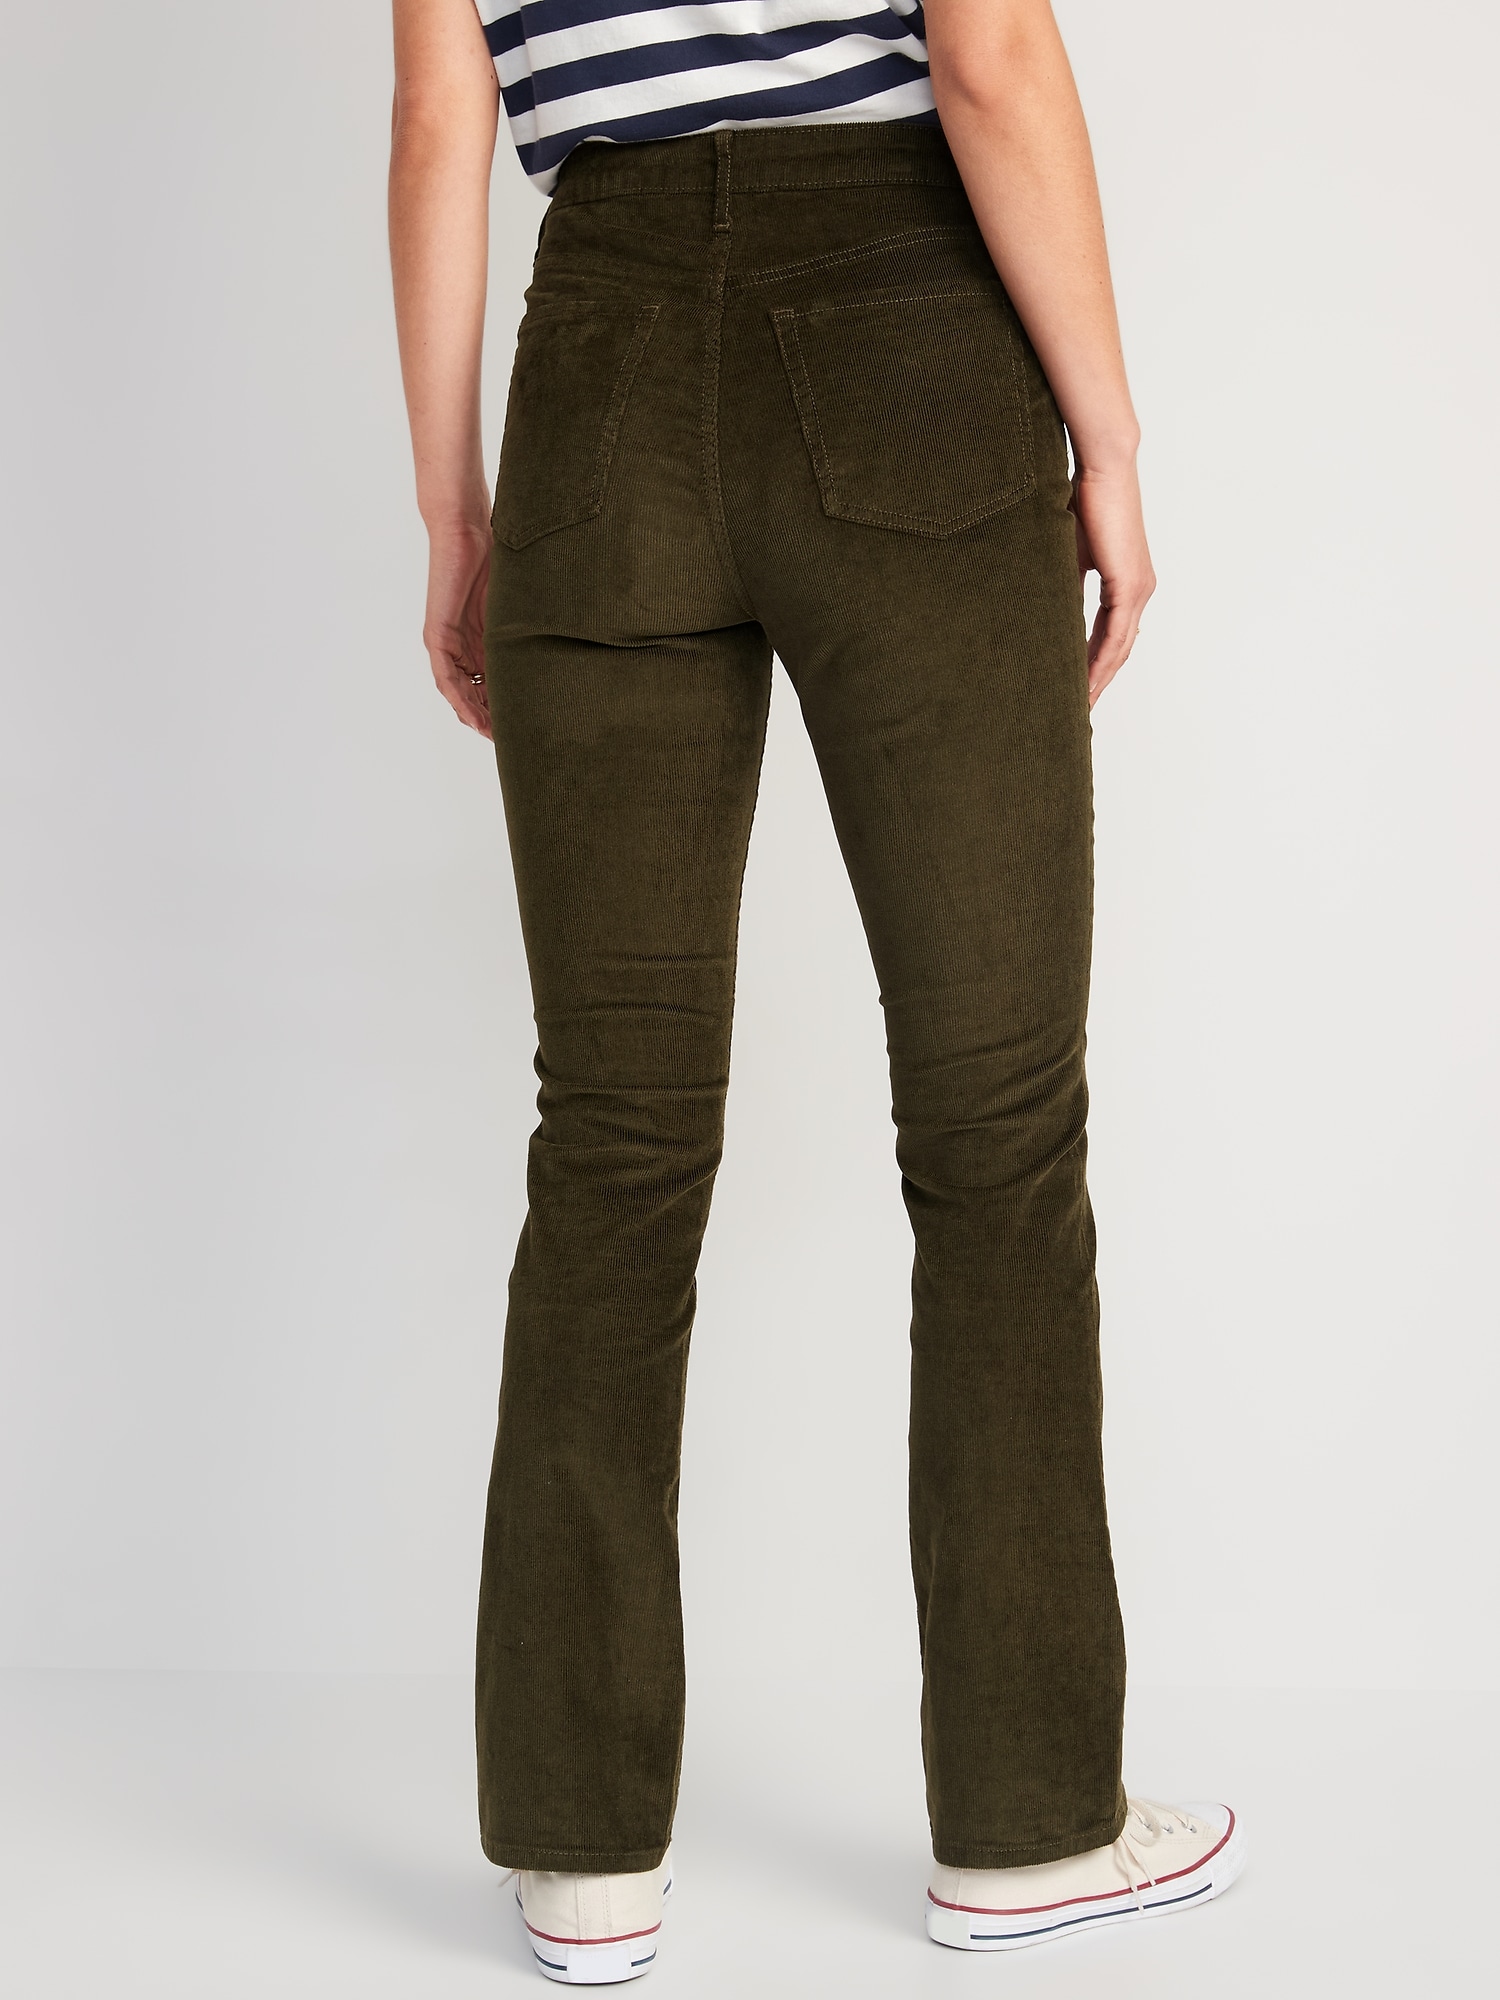 Extra High-Waisted Kicker Corduroy Boot-Cut Pants for Women | Old Navy